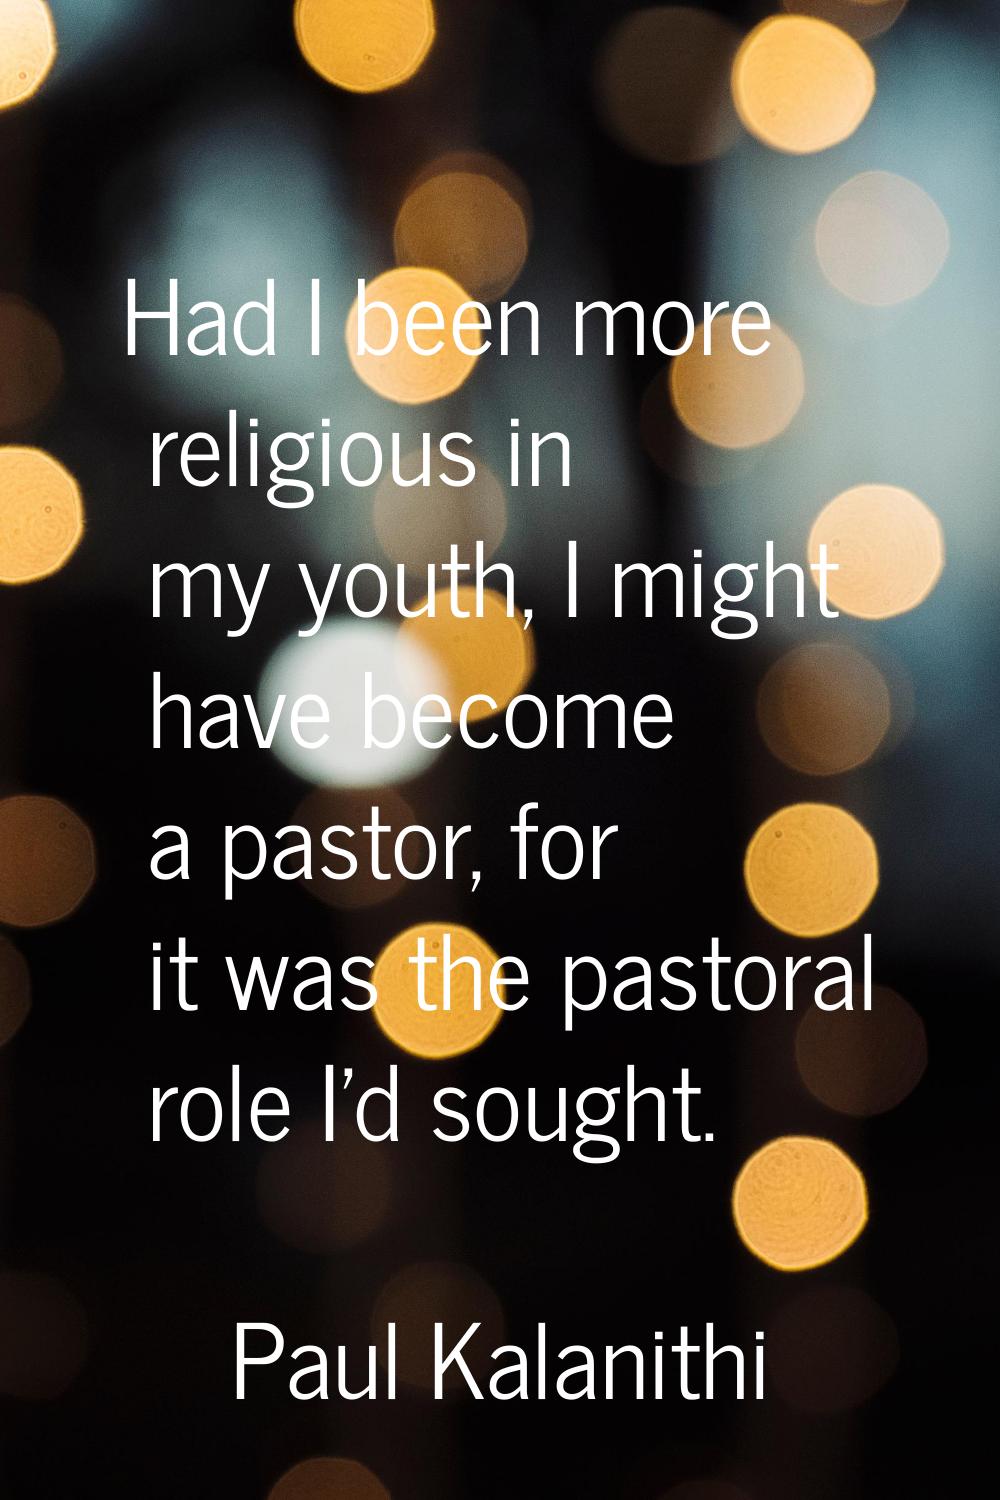 Had I been more religious in my youth, I might have become a pastor, for it was the pastoral role I